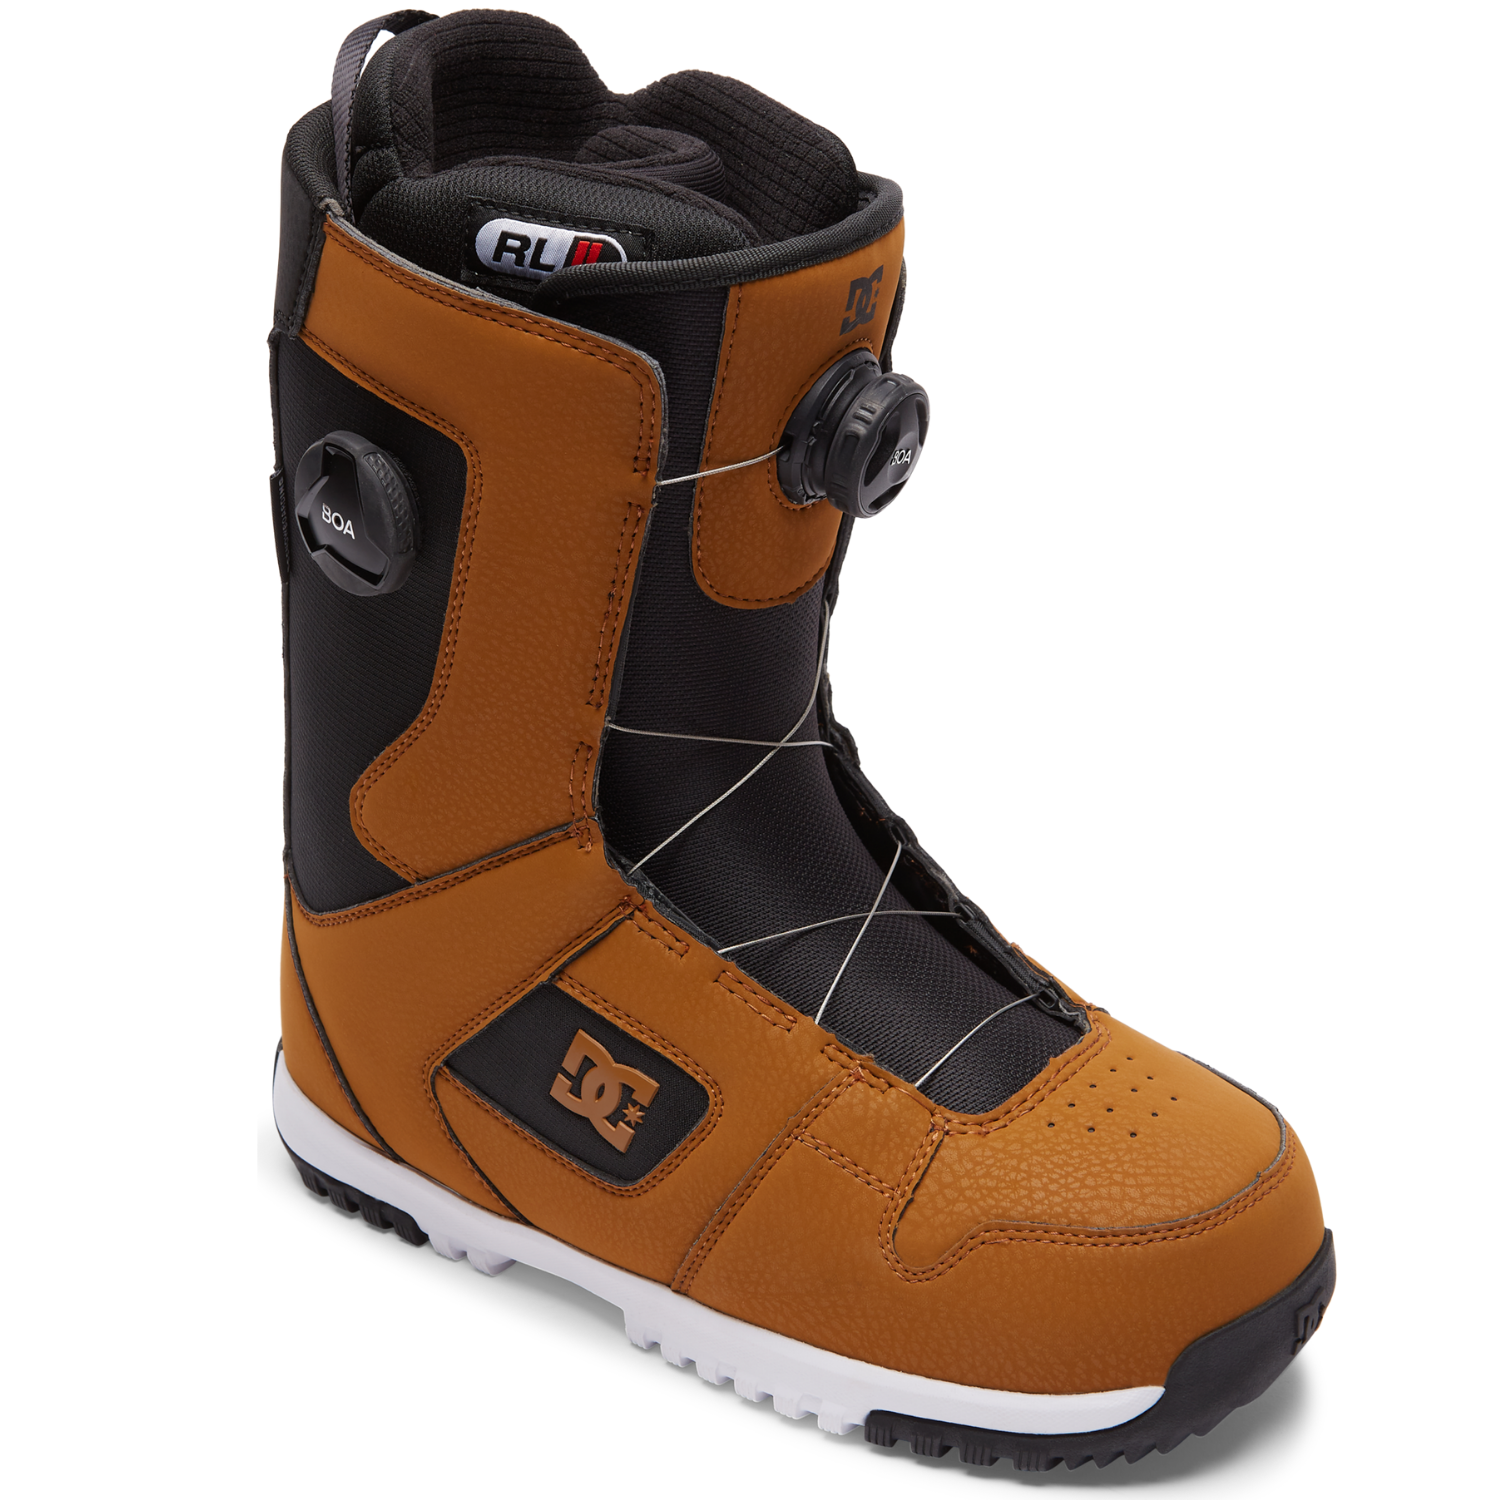 2023 DC Phase BOA Snowboard Boots For Sale